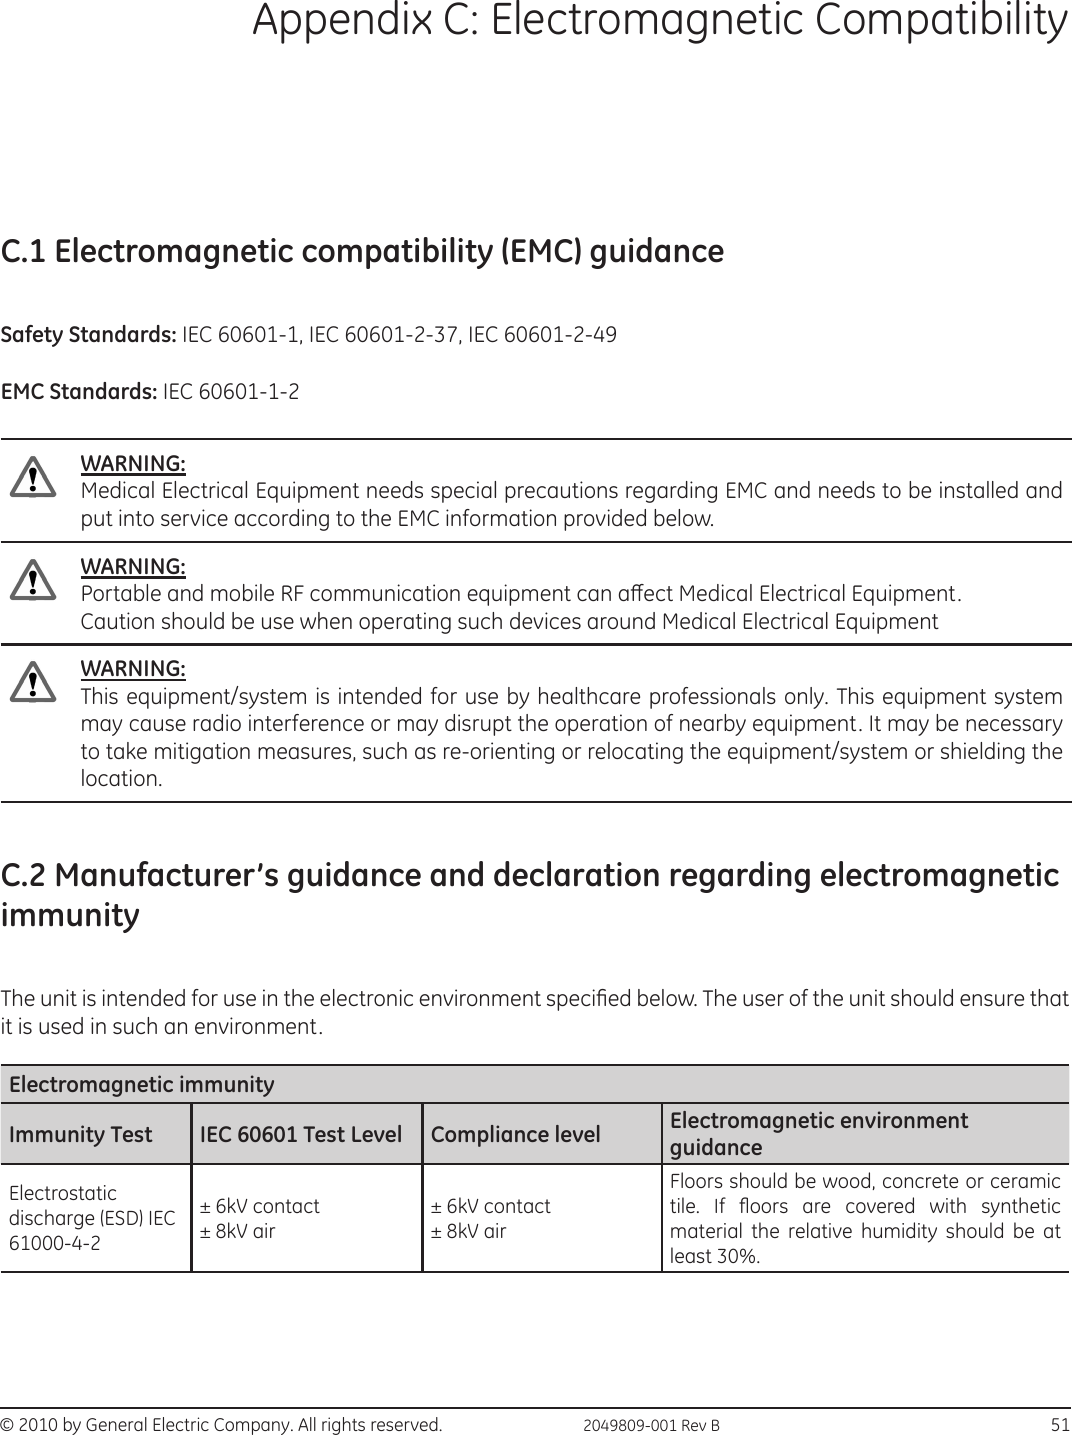 © 2010 by General Electric Company. All rights reserved.  2049809-001 Rev B                                                                            51Appendix C: Electromagnetic CompatibilityC.1 Electromagnetic compatibility (EMC) guidanceSafety Standards: IEC 60601-1, IEC 60601-2-37, IEC 60601-2-49EMC Standards: IEC 60601-1-2WARNING:Medical Electrical Equipment needs special precautions regarding EMC and needs to be installed and put into service according to the EMC information provided below.WARNING:Portable and mobile RF communication equipment can aect Medical Electrical Equipment. Caution should be use when operating such devices around Medical Electrical EquipmentWARNING:This equipment/system is intended for use by healthcare professionals only. This equipment system may cause radio interference or may disrupt the operation of nearby equipment. It may be necessary to take mitigation measures, such as re-orienting or relocating the equipment/system or shielding the location.C.2 Manufacturer’s guidance and declaration regarding electromagnetic immunityThe unit is intended for use in the electronic environment specied below. The user of the unit should ensure that it is used in such an environment.Electromagnetic immunityImmunity Test  IEC 60601 Test Level  Compliance level  Electromagnetic environment guidance Electrostatic discharge (ESD) IEC 61000-4-2 ± 6kV contact                     ± 8kV air ± 6kV contact  ± 8kV air Floors should be wood, concrete or ceramic tile.  If  oors  are  covered  with  synthetic material the relative humidity should be at least 30%.